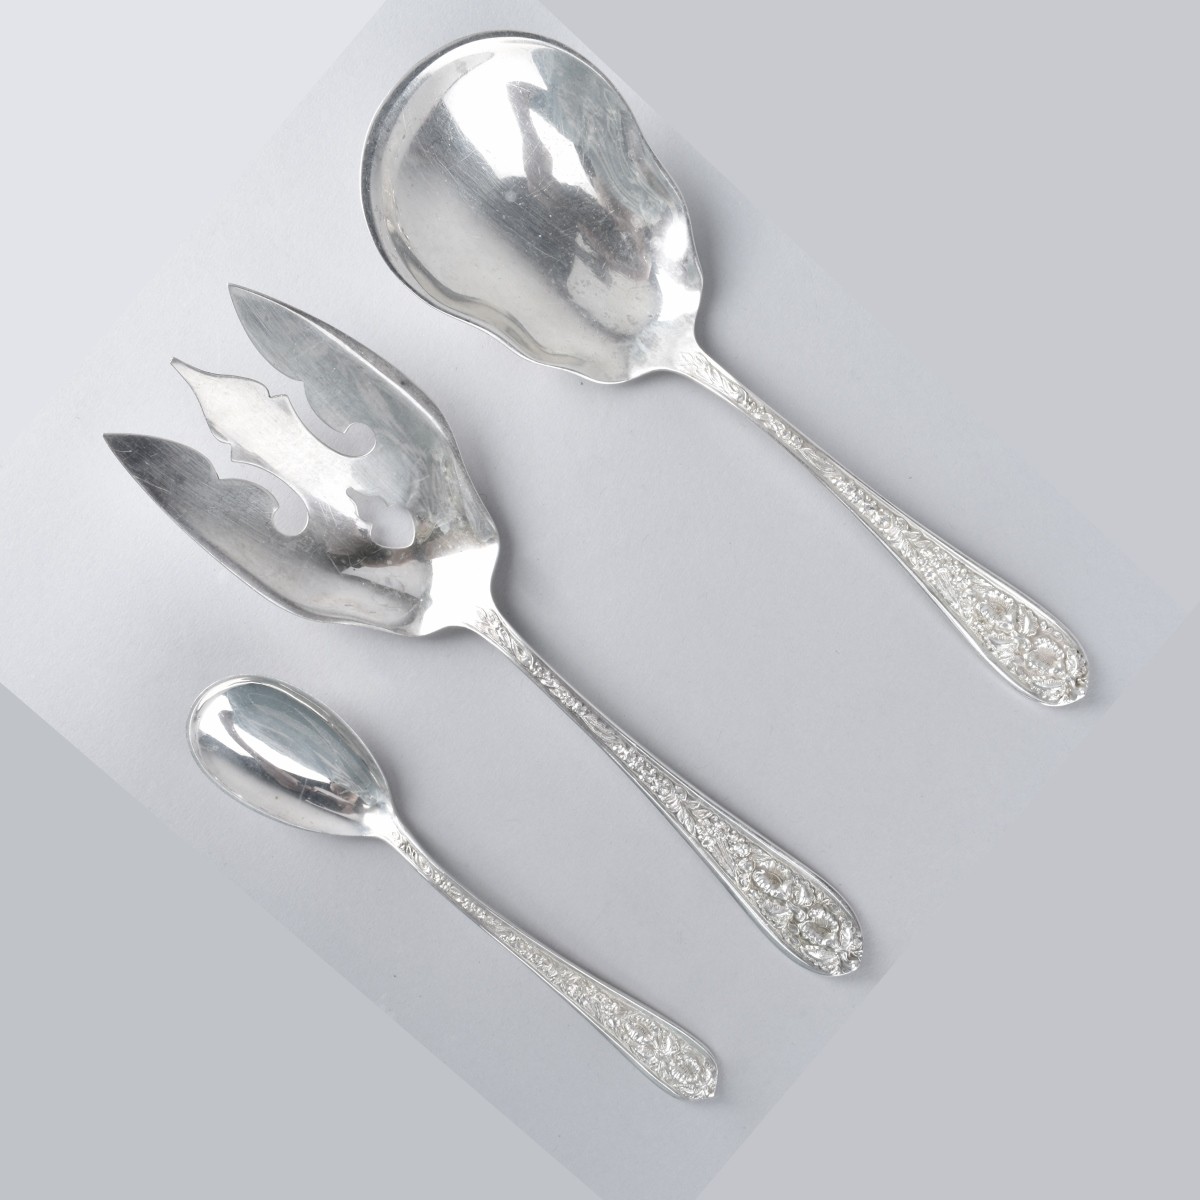 Stieff Corsage Repousse Sterling Flatware